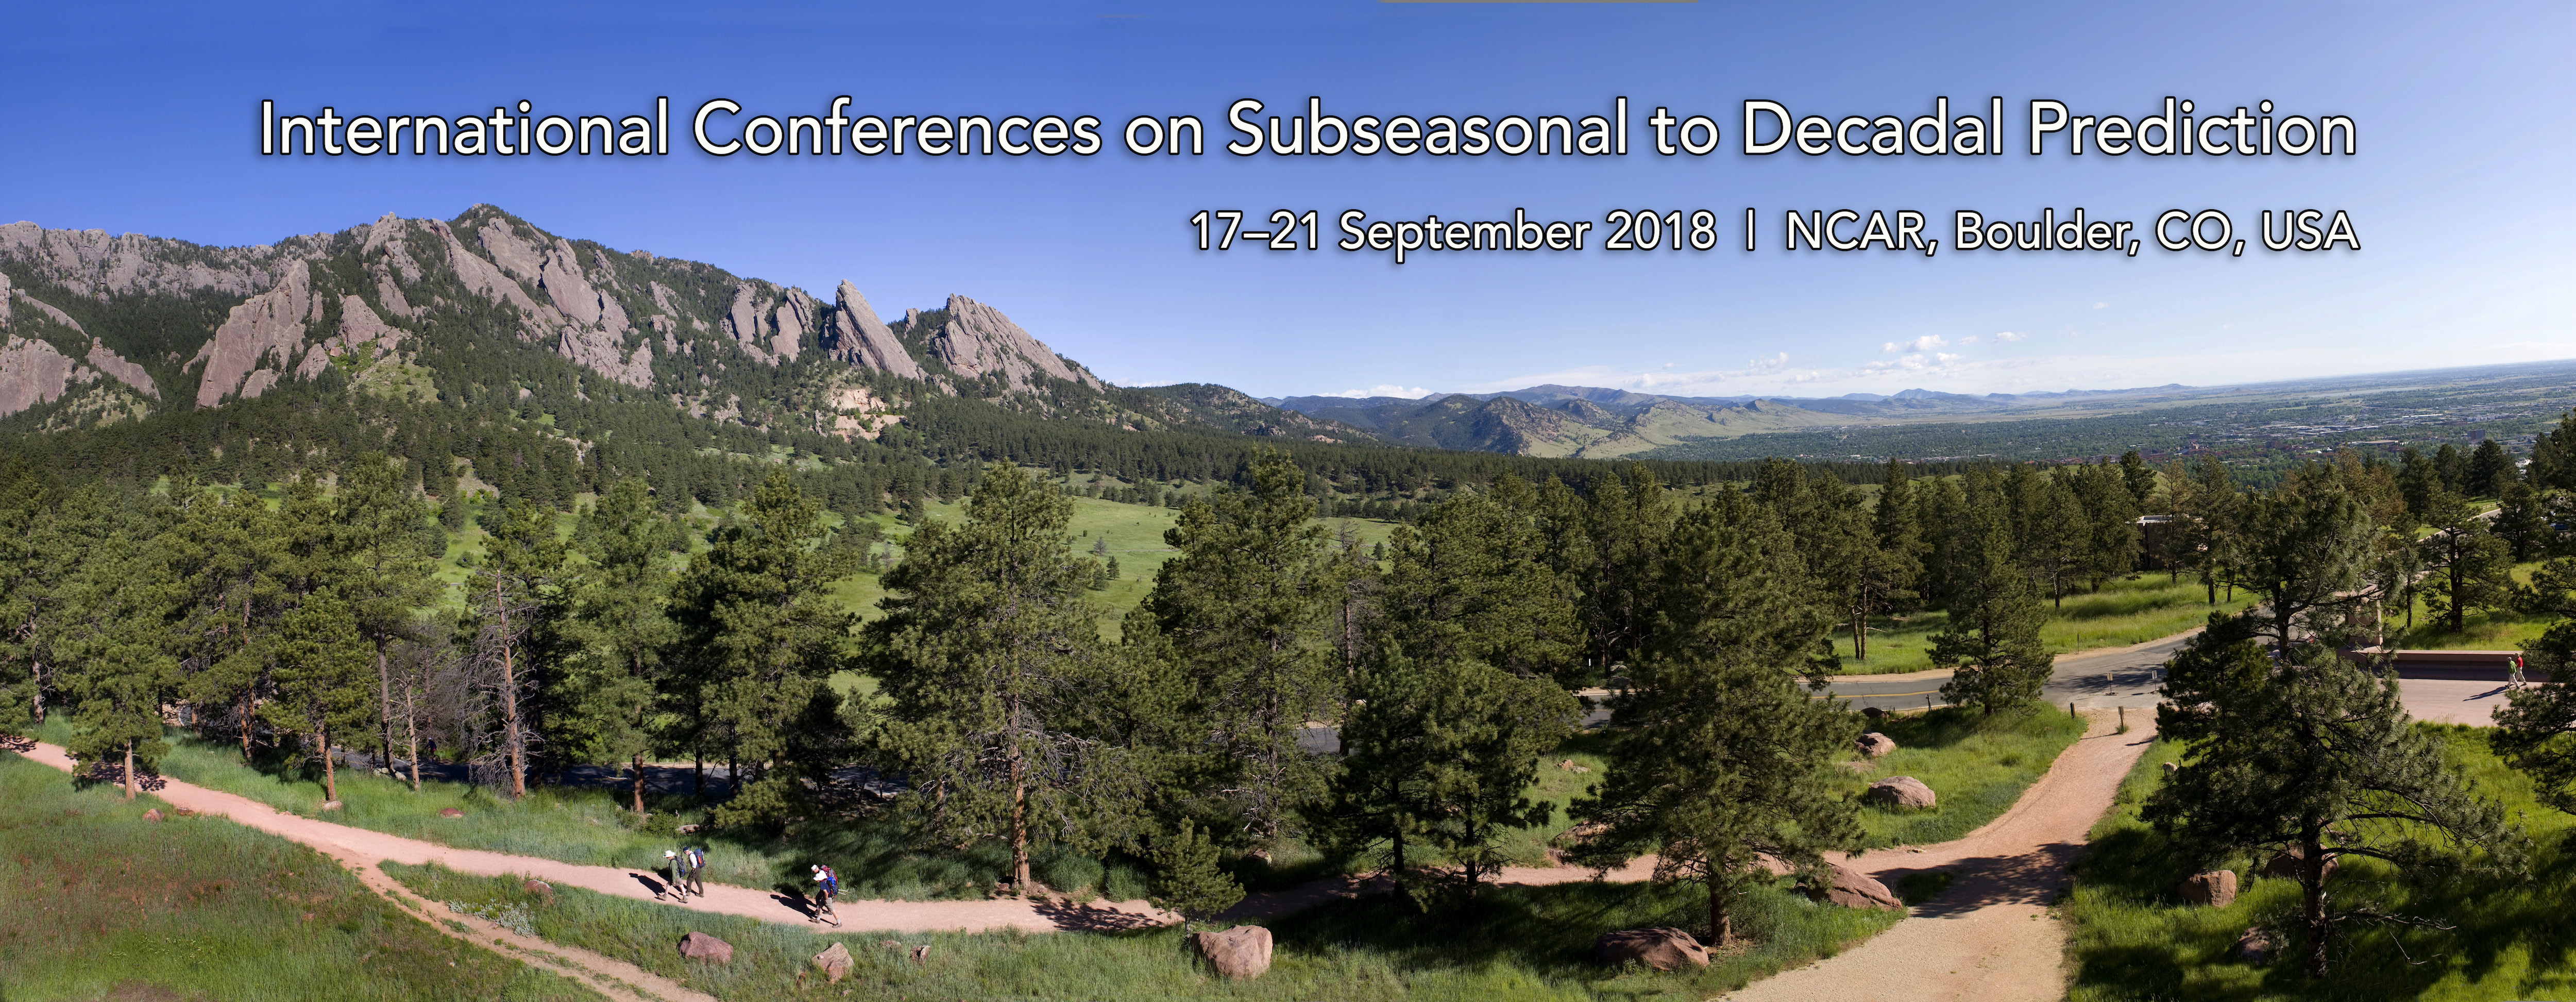 International Conferences on Subseasonal to Decadal Prediction